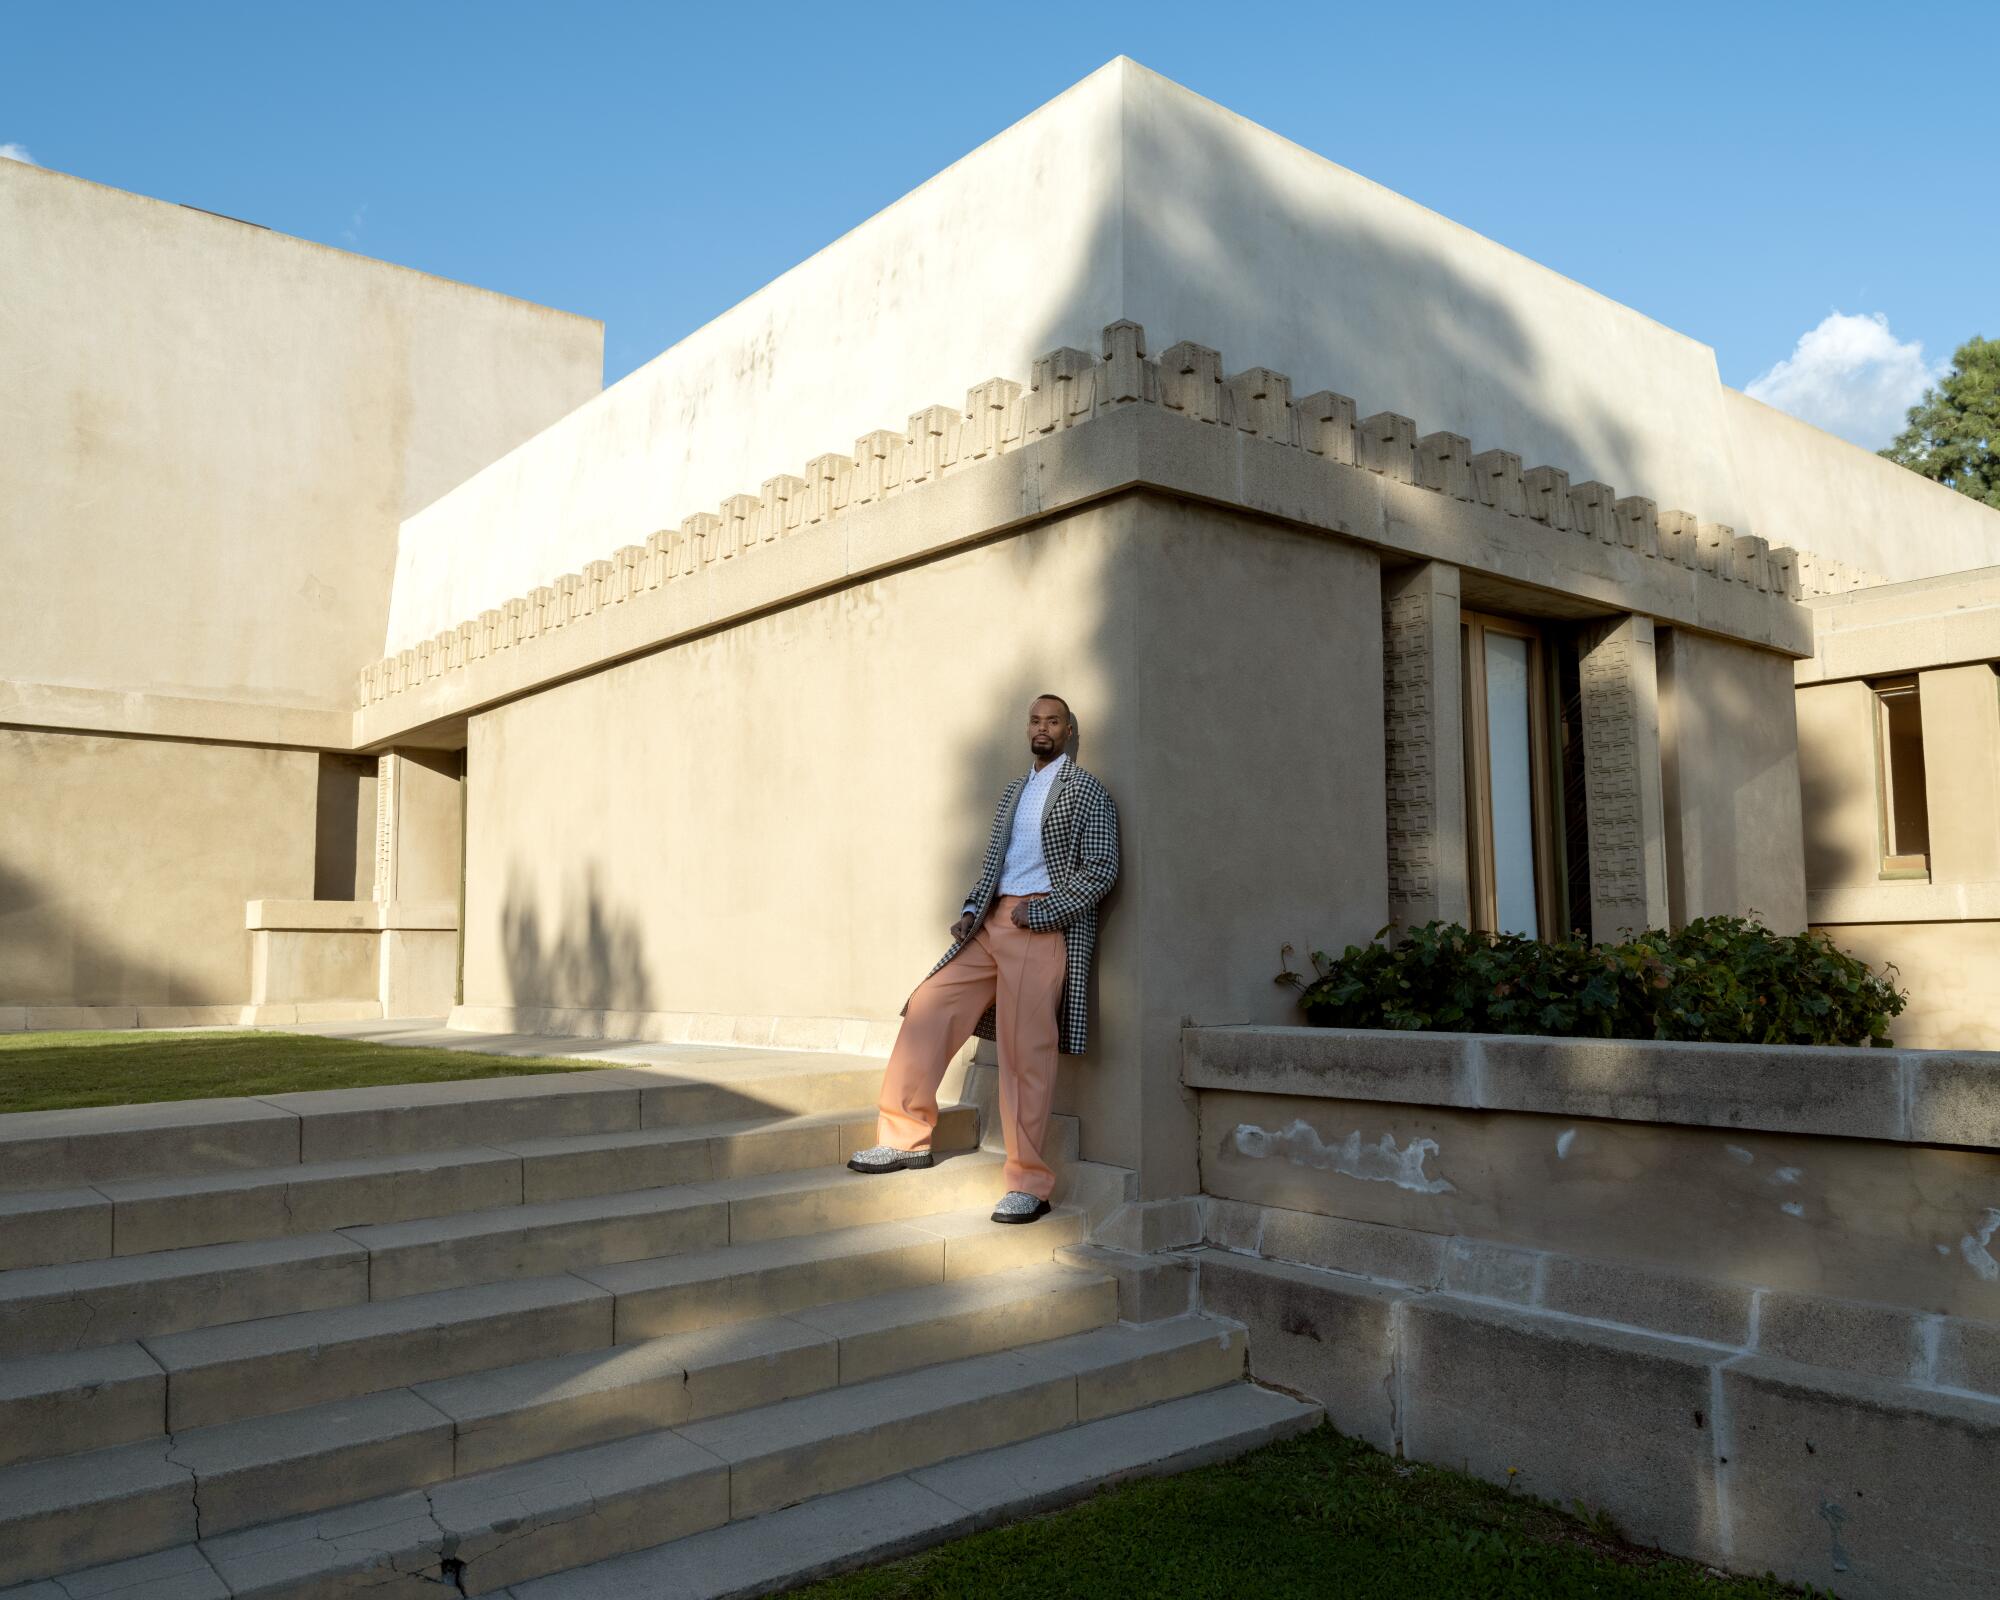 A man wearing orange trousers leans against the exterior of the Hollyhock House.